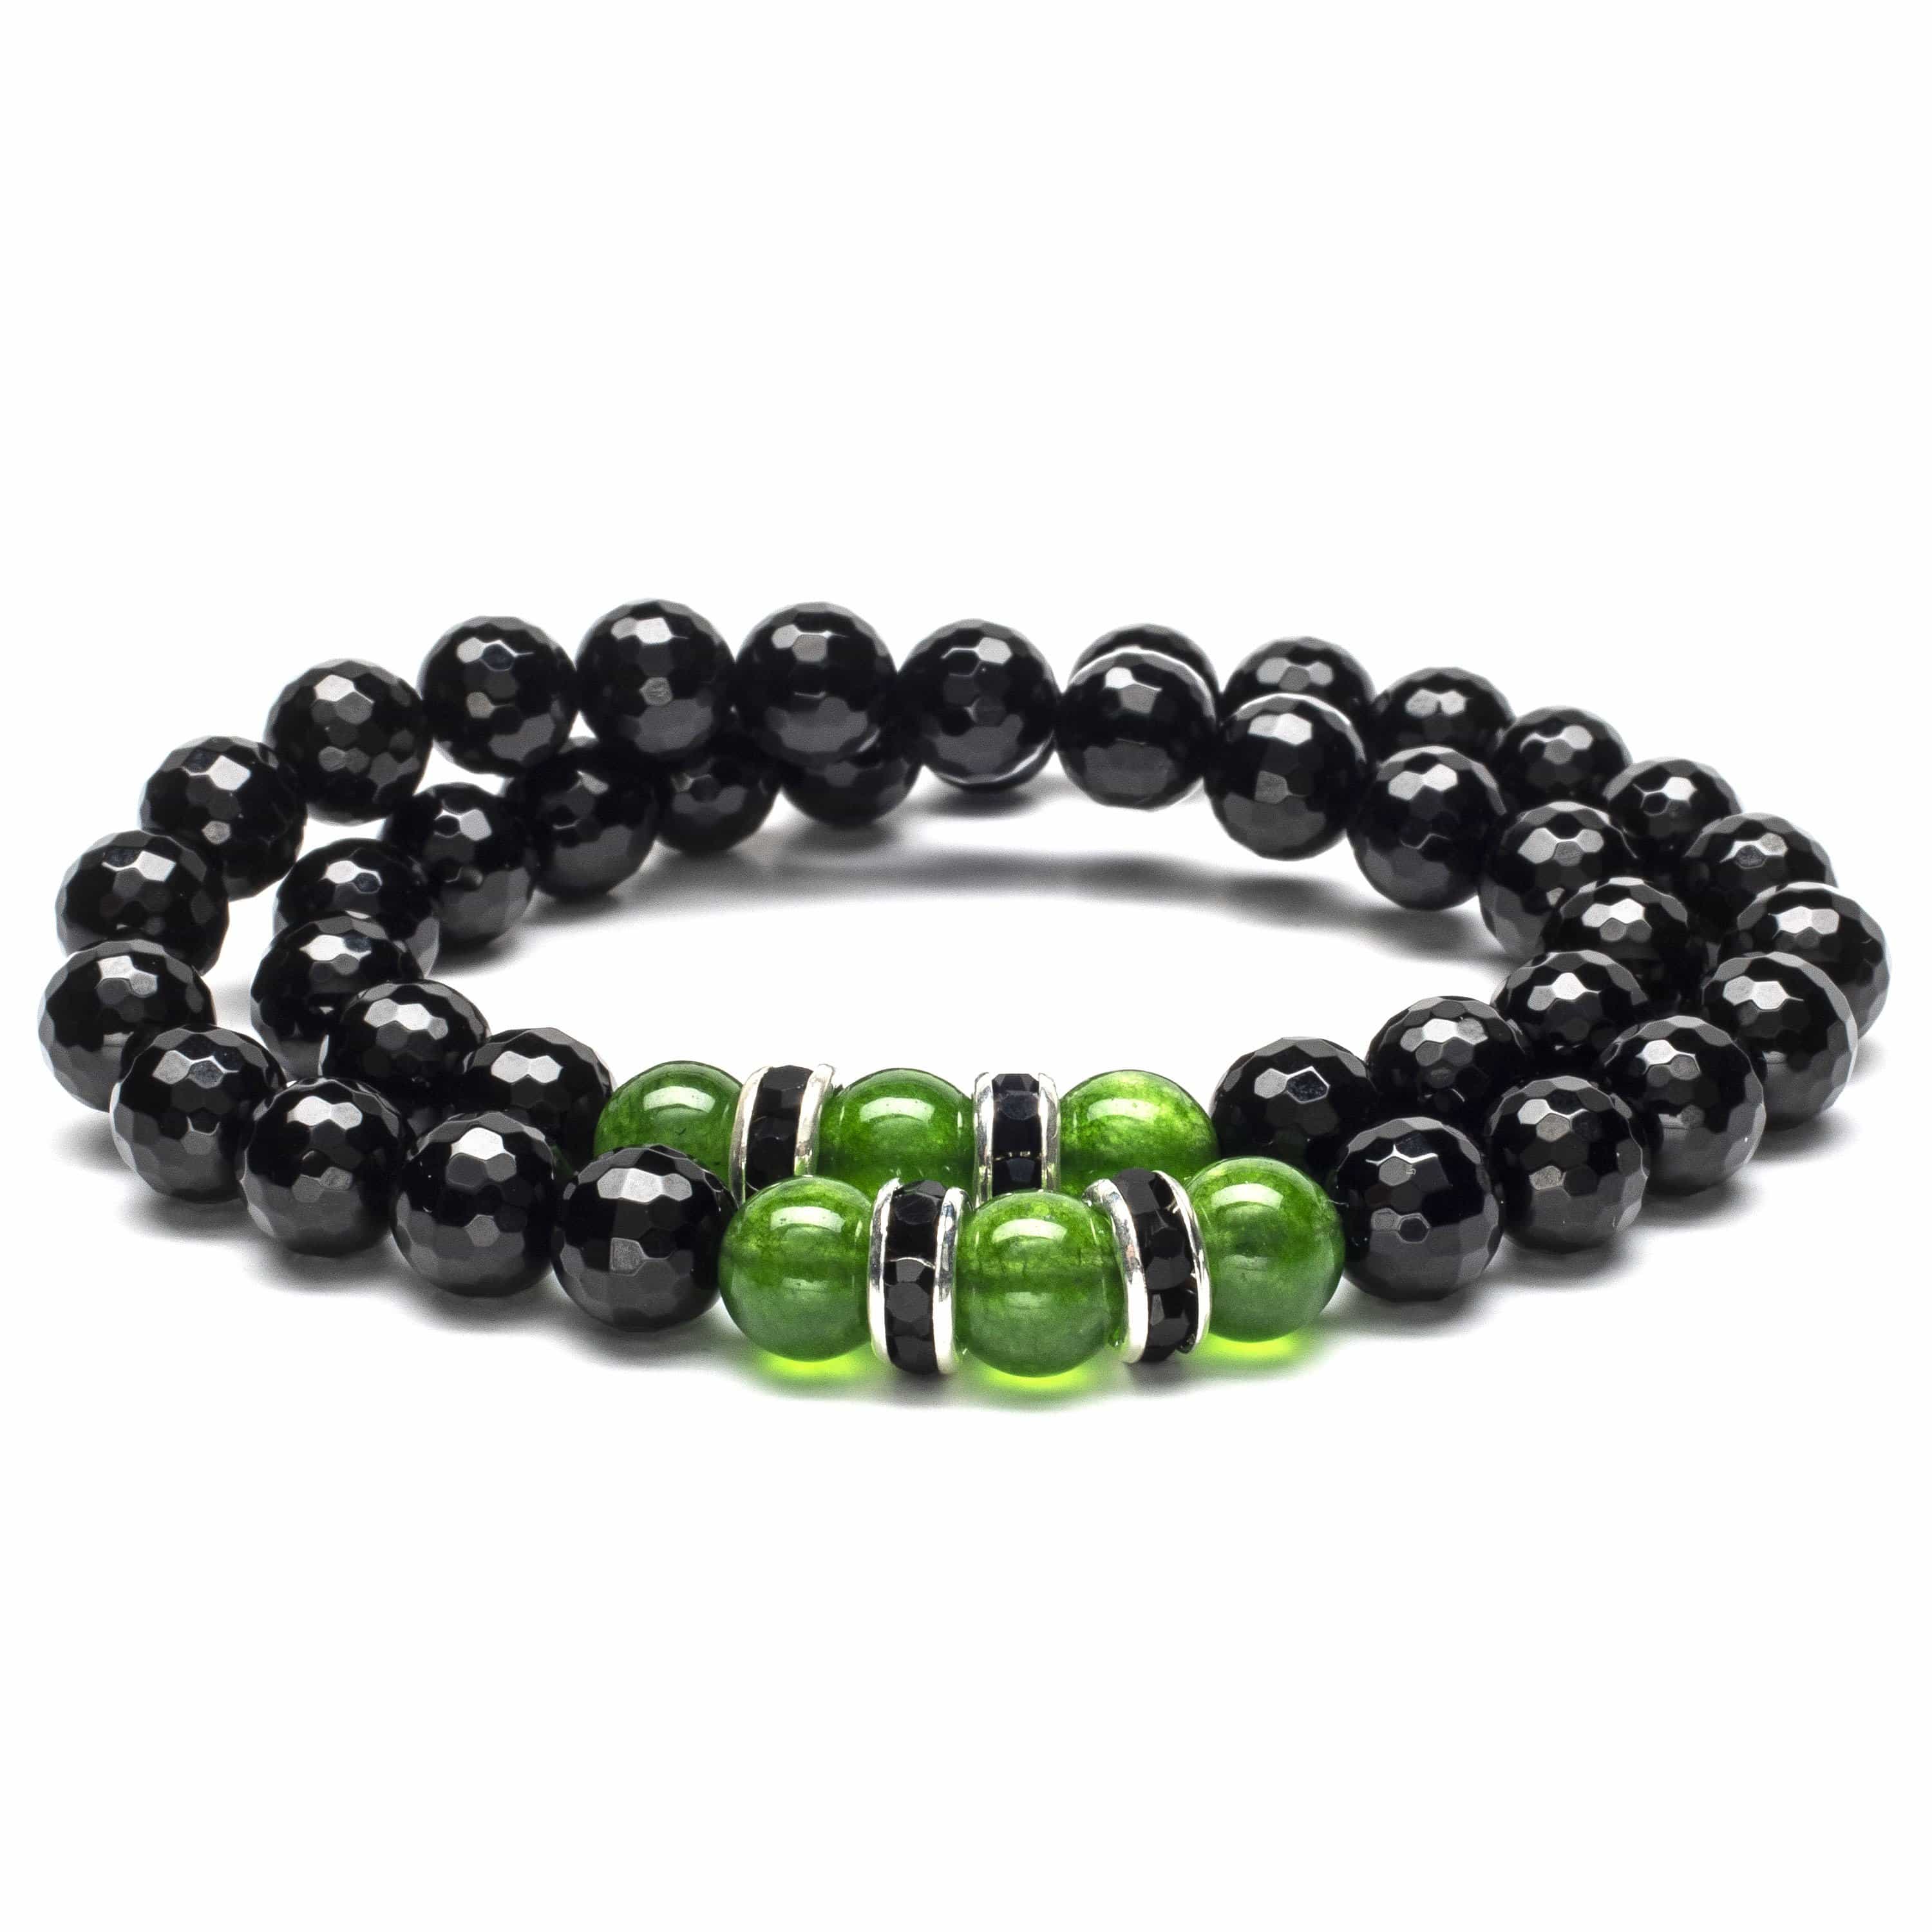 Kalifano Gemstone Bracelets Faceted Black Agate 8mm Beads with Aventurine and and Black and Silver Accent Beads Double Wrap Elastic Gemstone Bracelet WHITE-BGI2-037